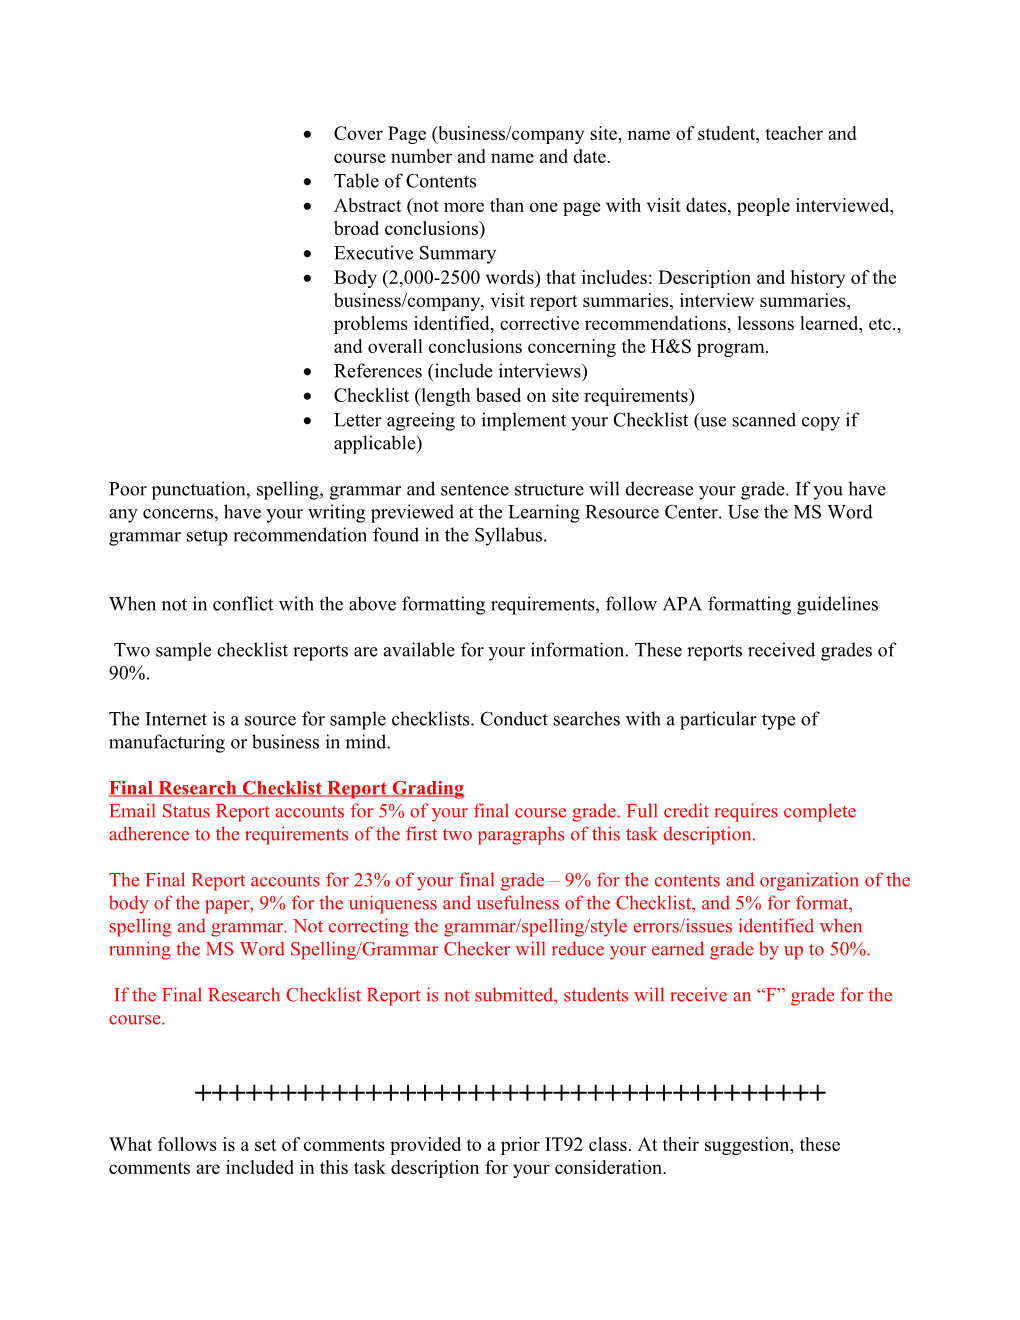 IT92 Industrial Safety Management Final Research Checklist Report